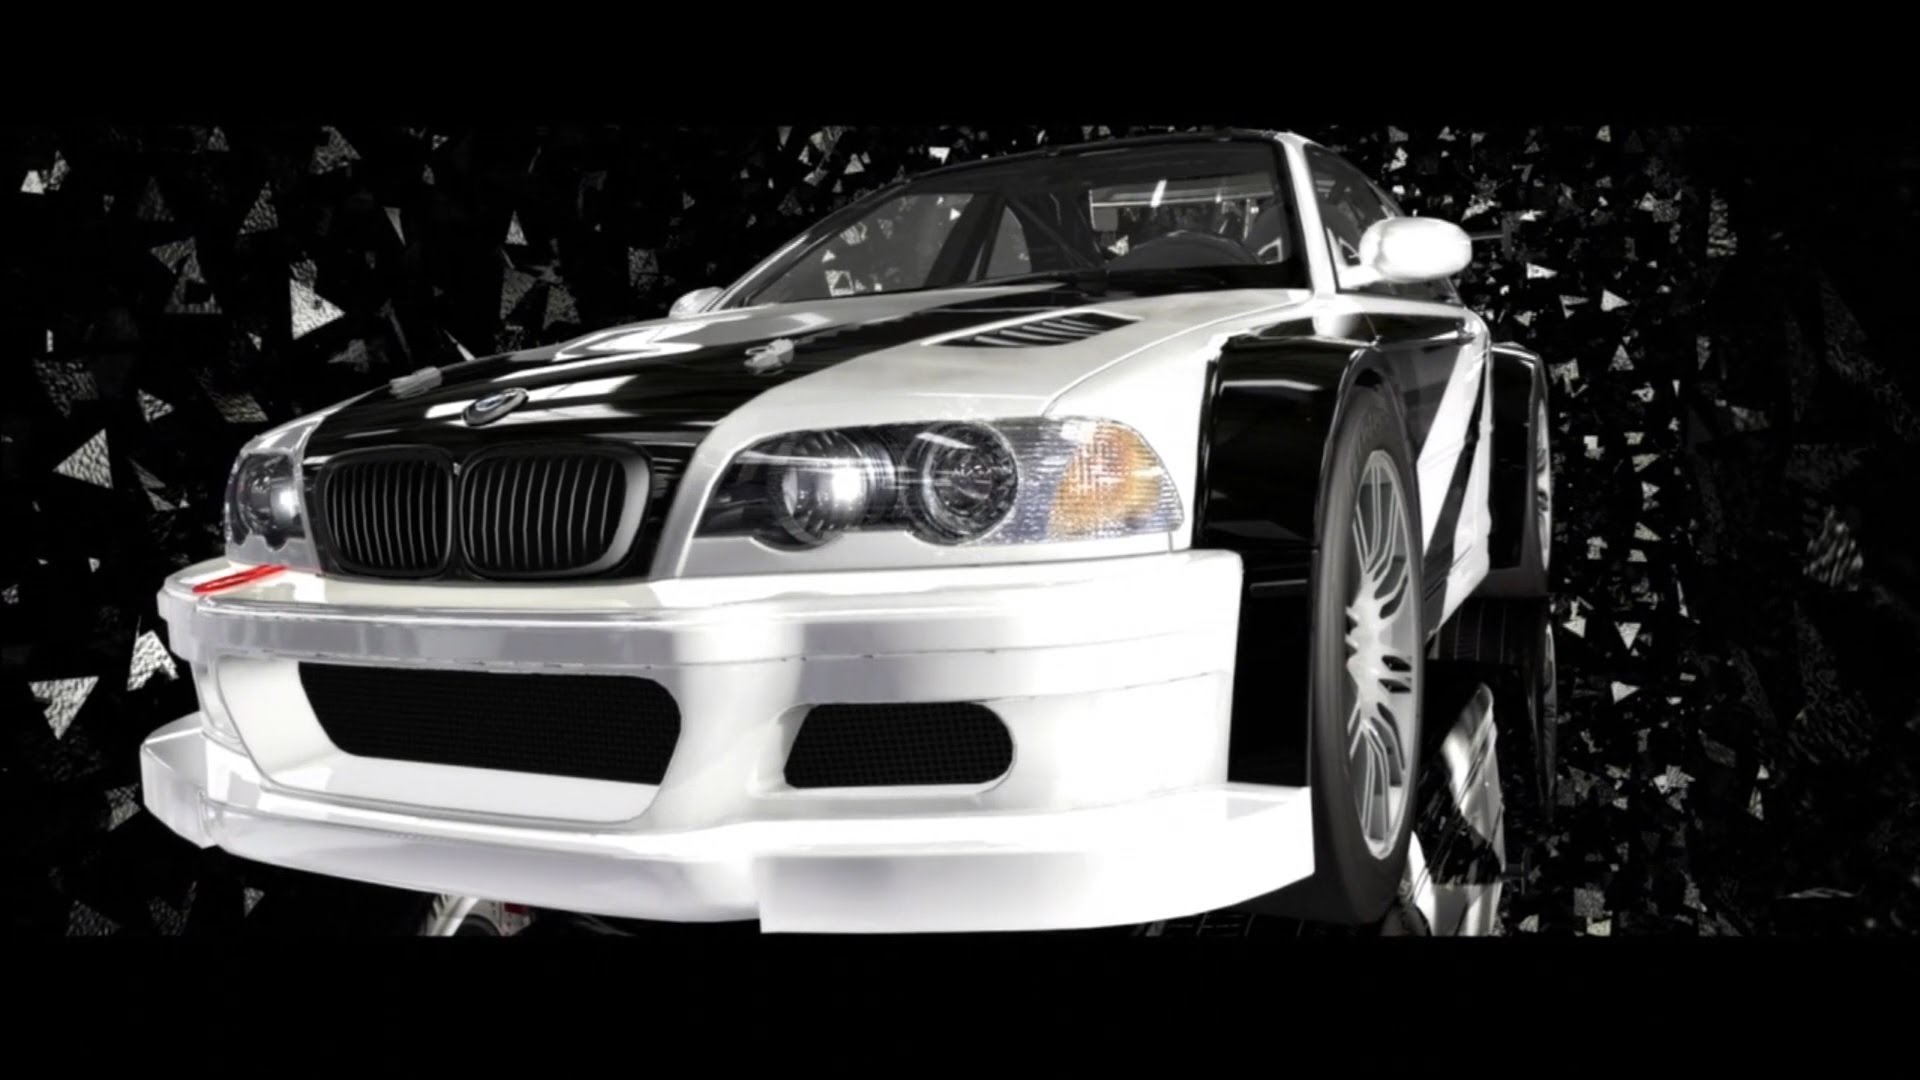 Amazing Bmw M3 Gtr Wallpaper Full HD Pictures